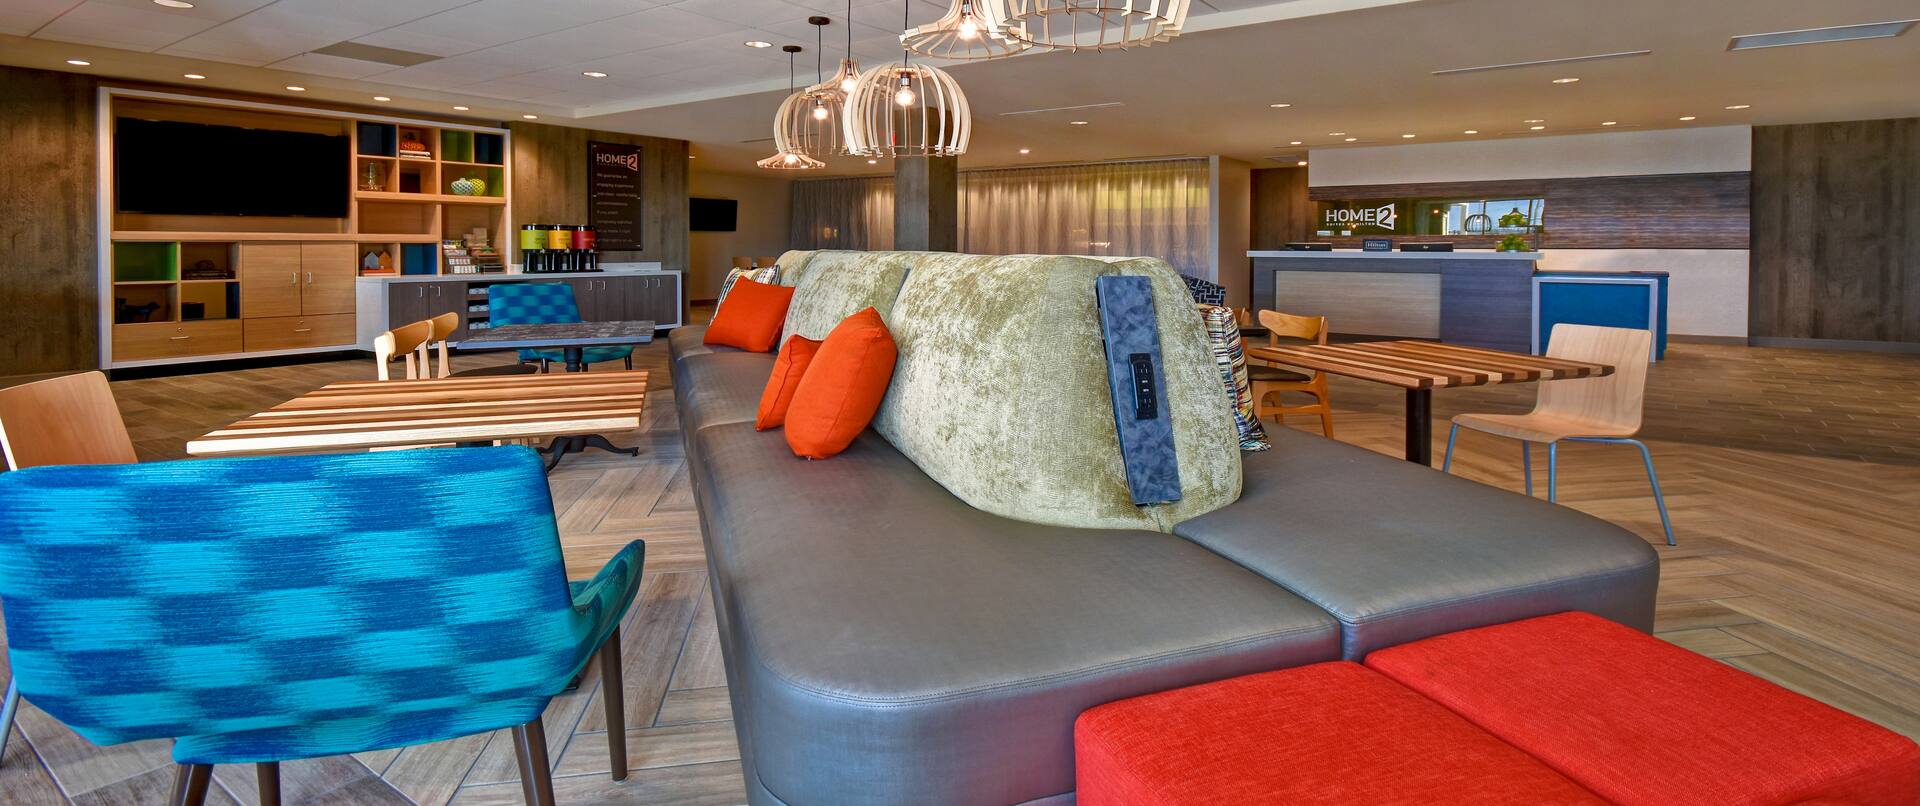 lobby seating area with coffee station